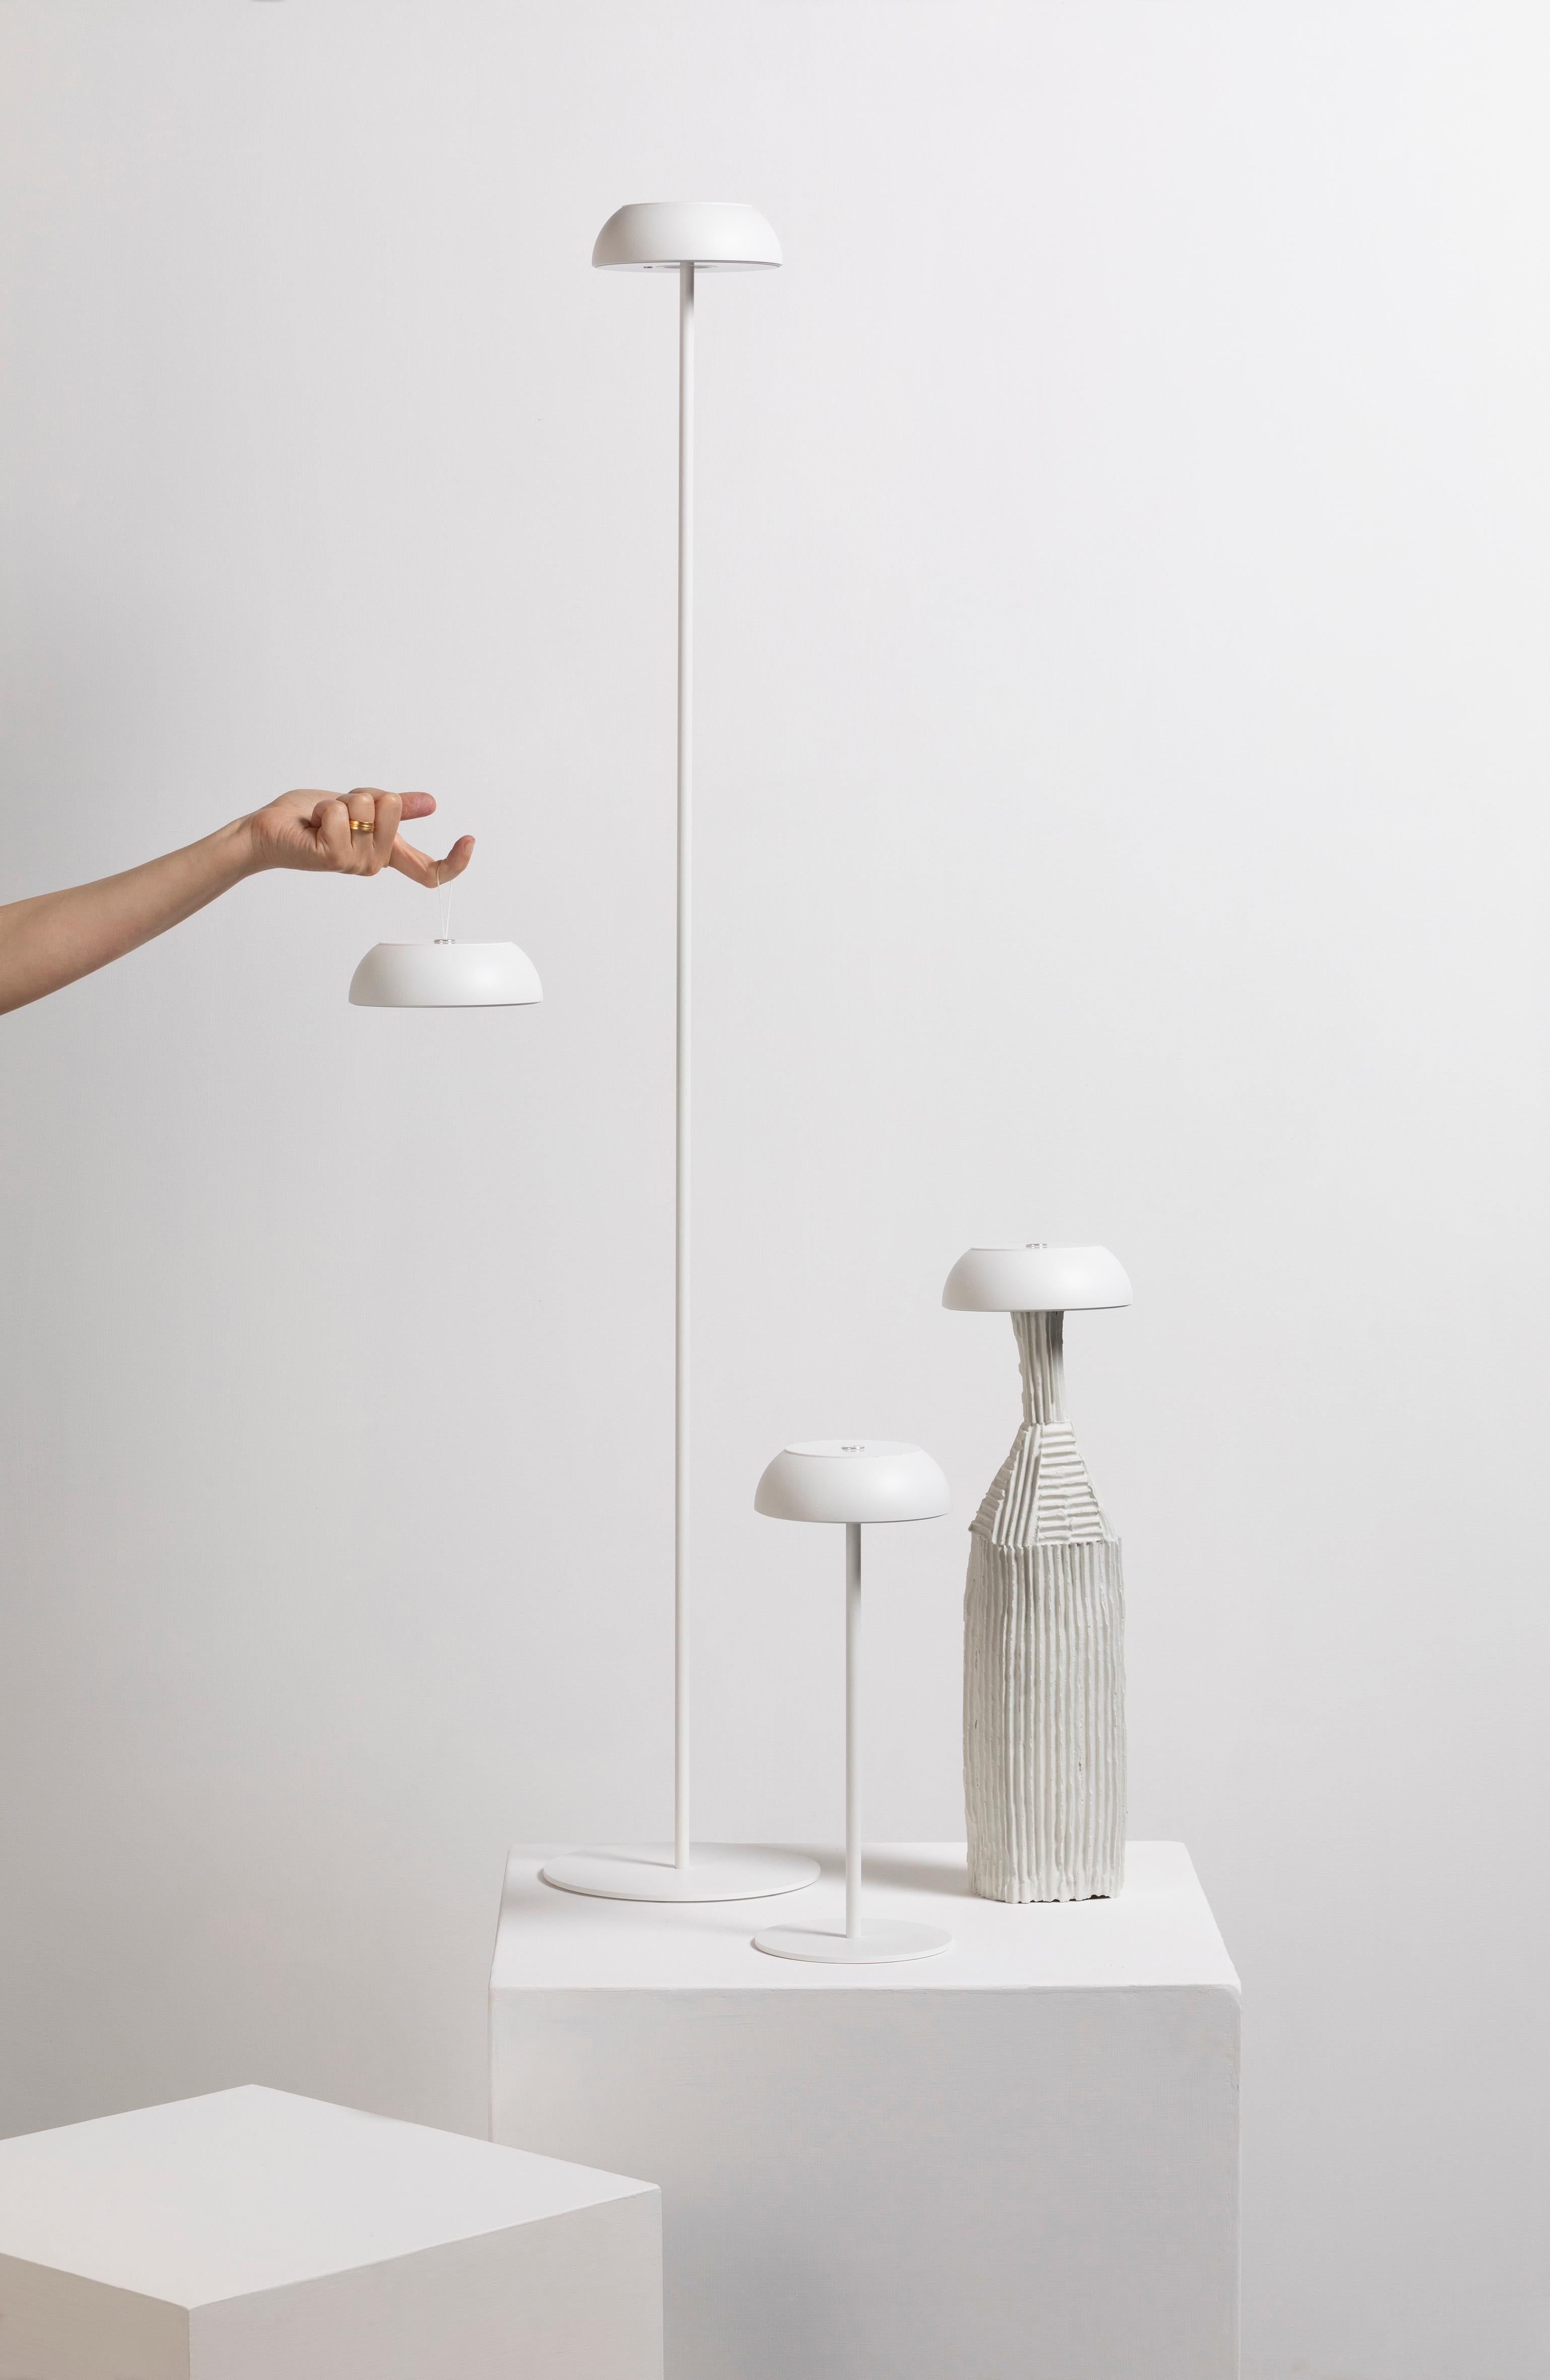 Axolight Float Floor Lamp in White Aluminum and Steel by Mario Alessiani

From the ingenuity of Axolight and the creativity of the designer Mario Alessiani, Float was born, a multifunctional and portable lamp, usable both outdoors and indoors,